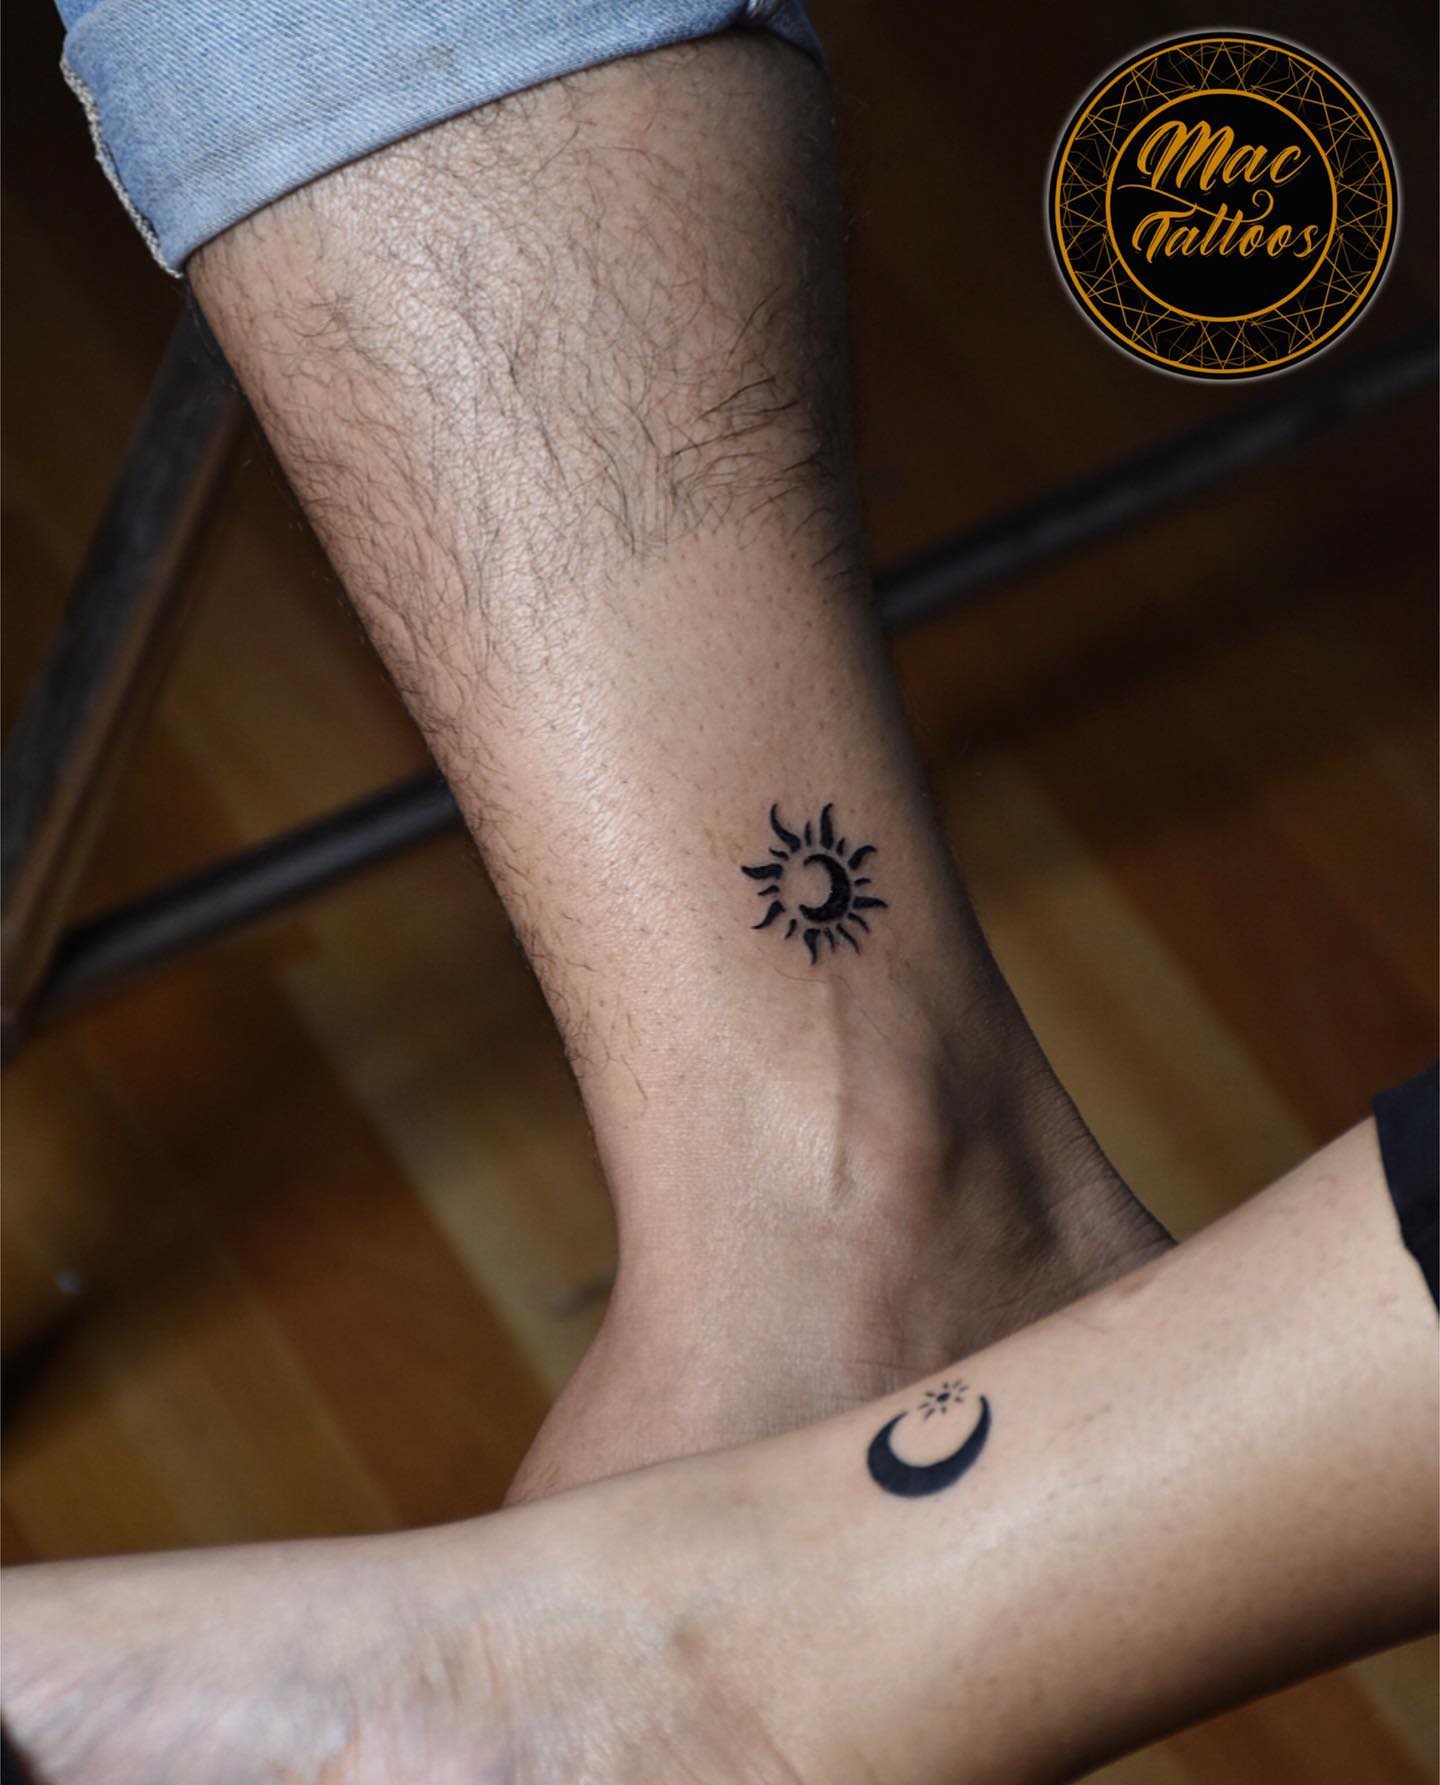 25 Romantic & Small Matching Tattoos for Couples - Small Tattoos & Ideas |  Couple tattoos unique, Small couple tattoos, Cute matching tattoos